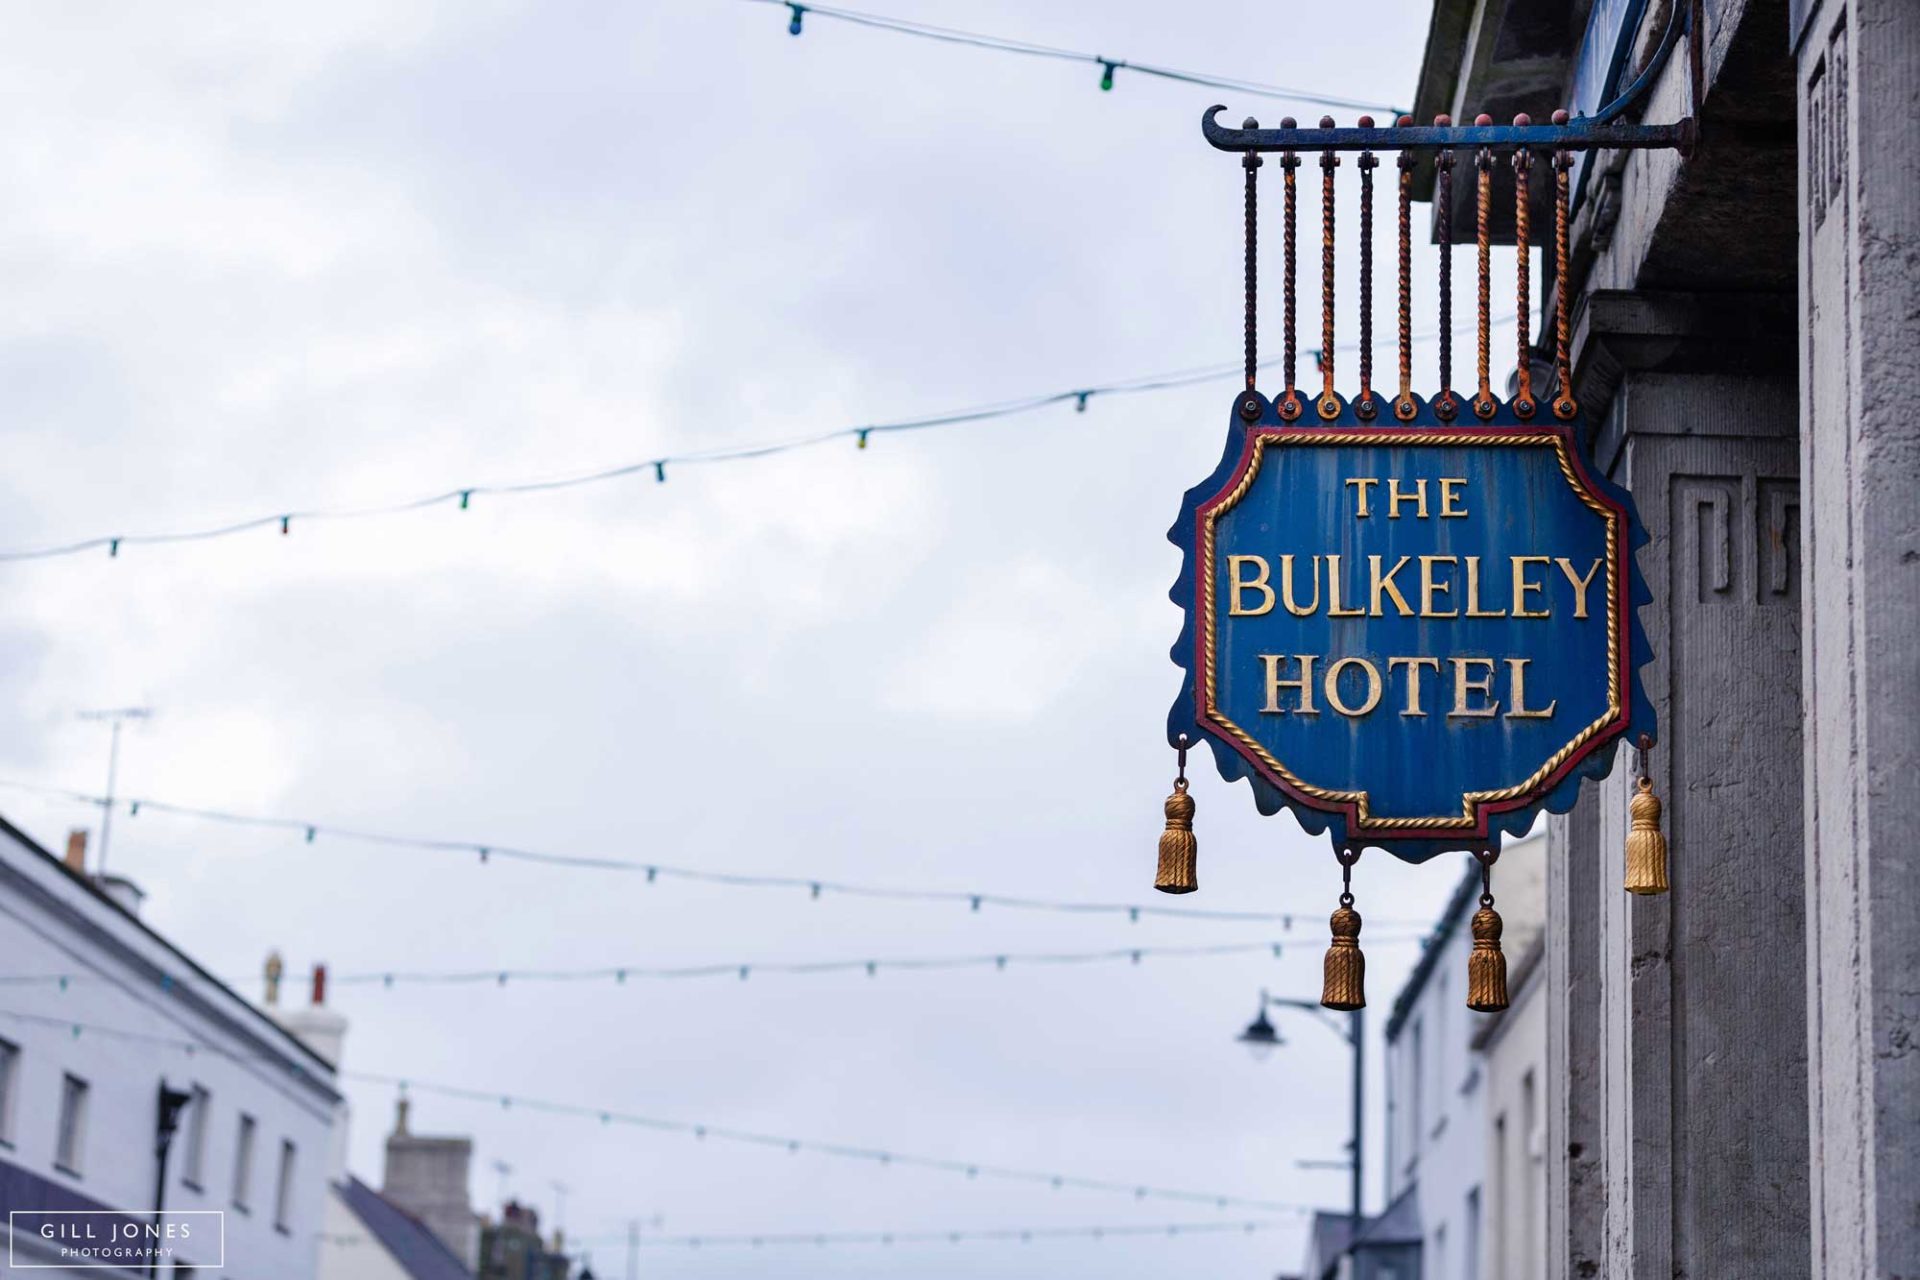 The Bulkeley Hotel's sign